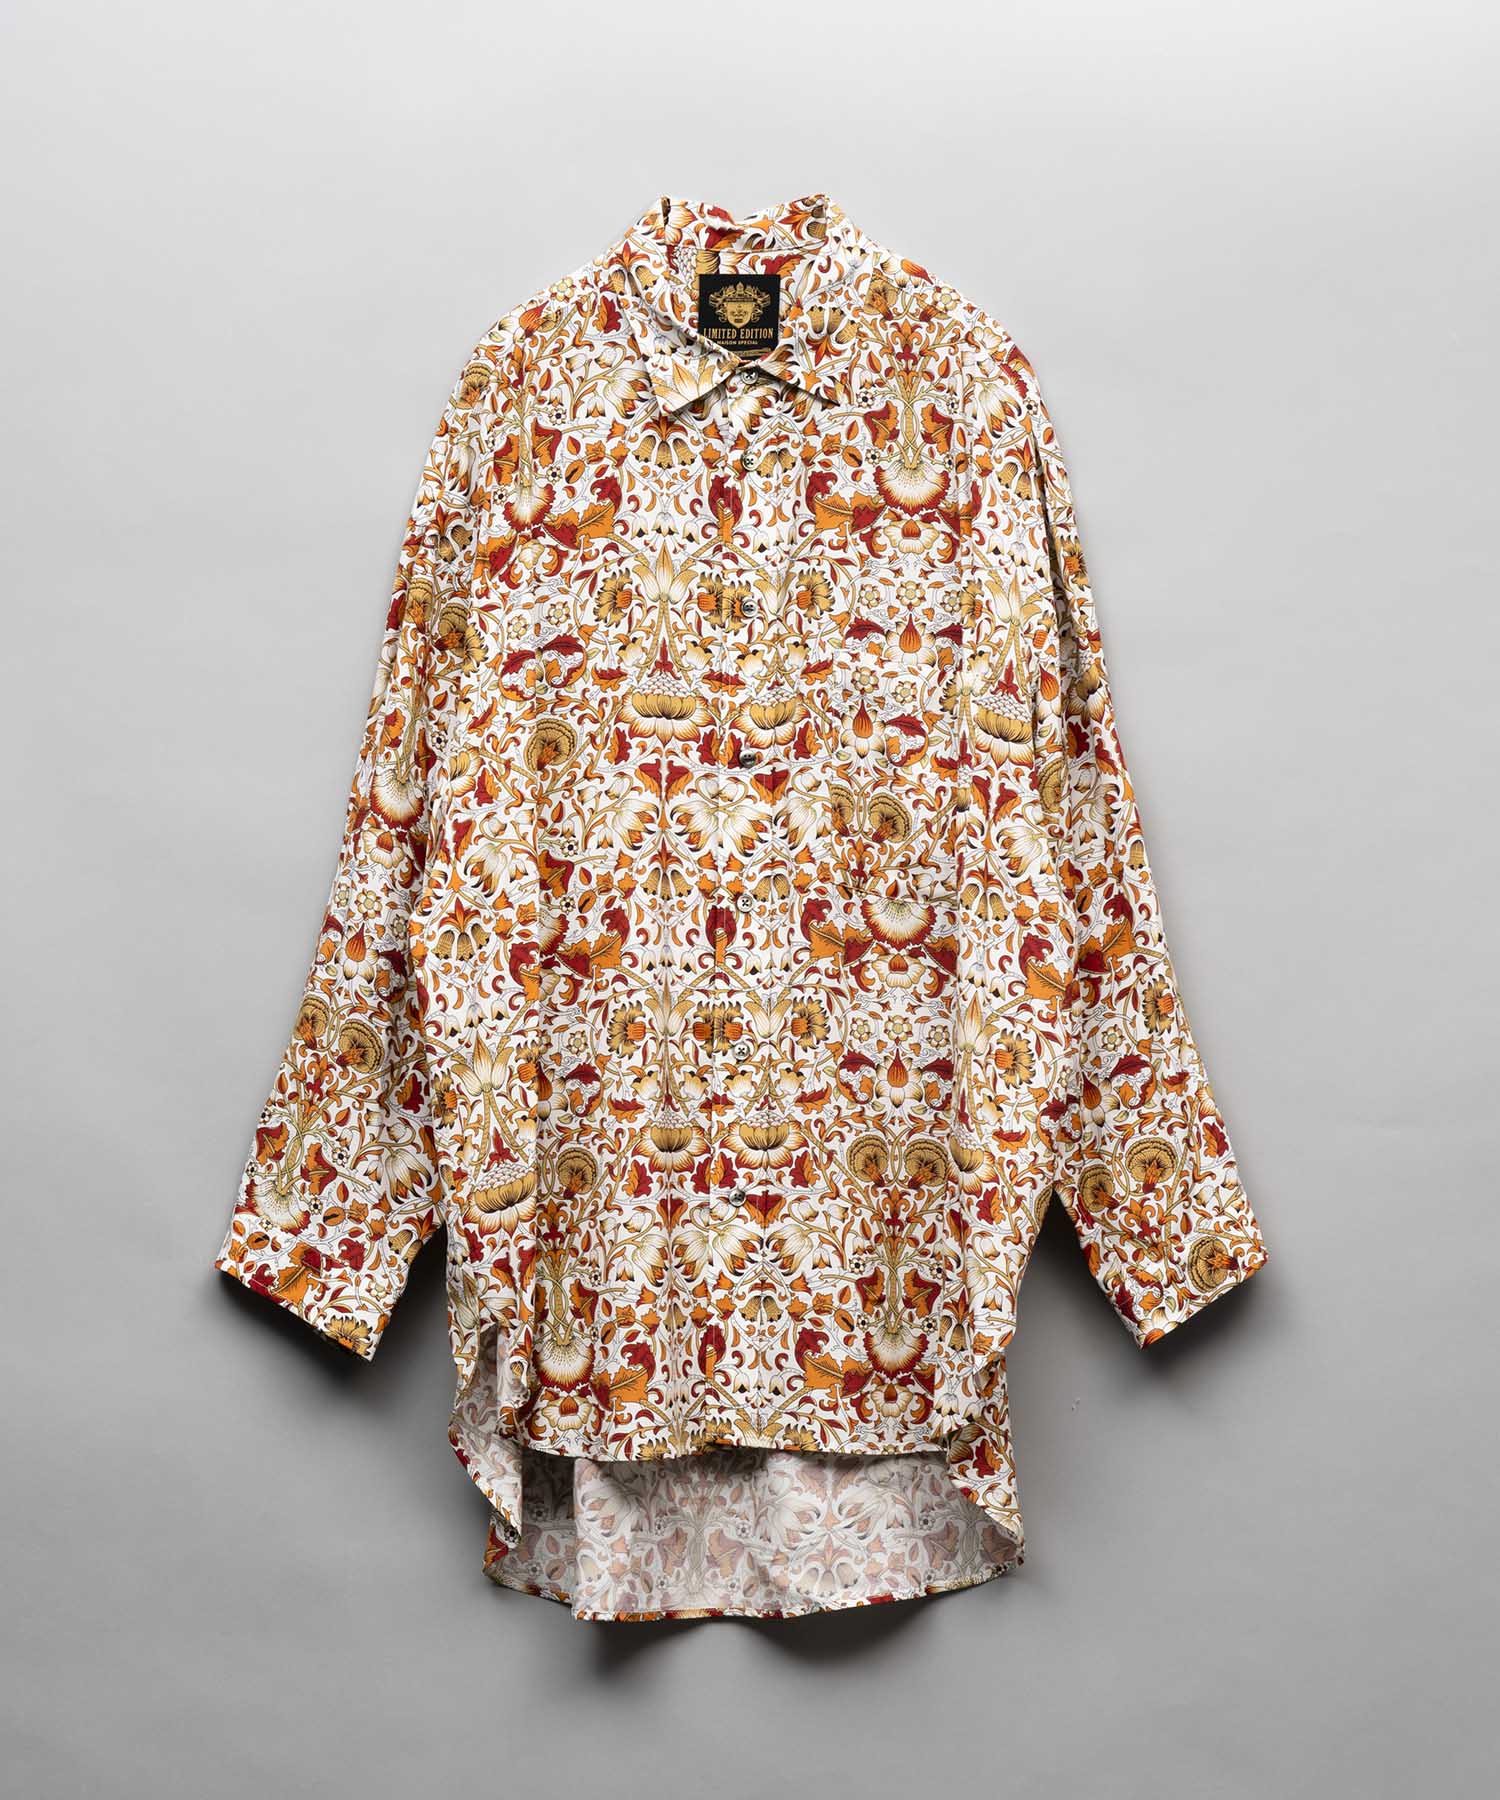 【LIMITED EDITION】Prime-Over Shirt Coat